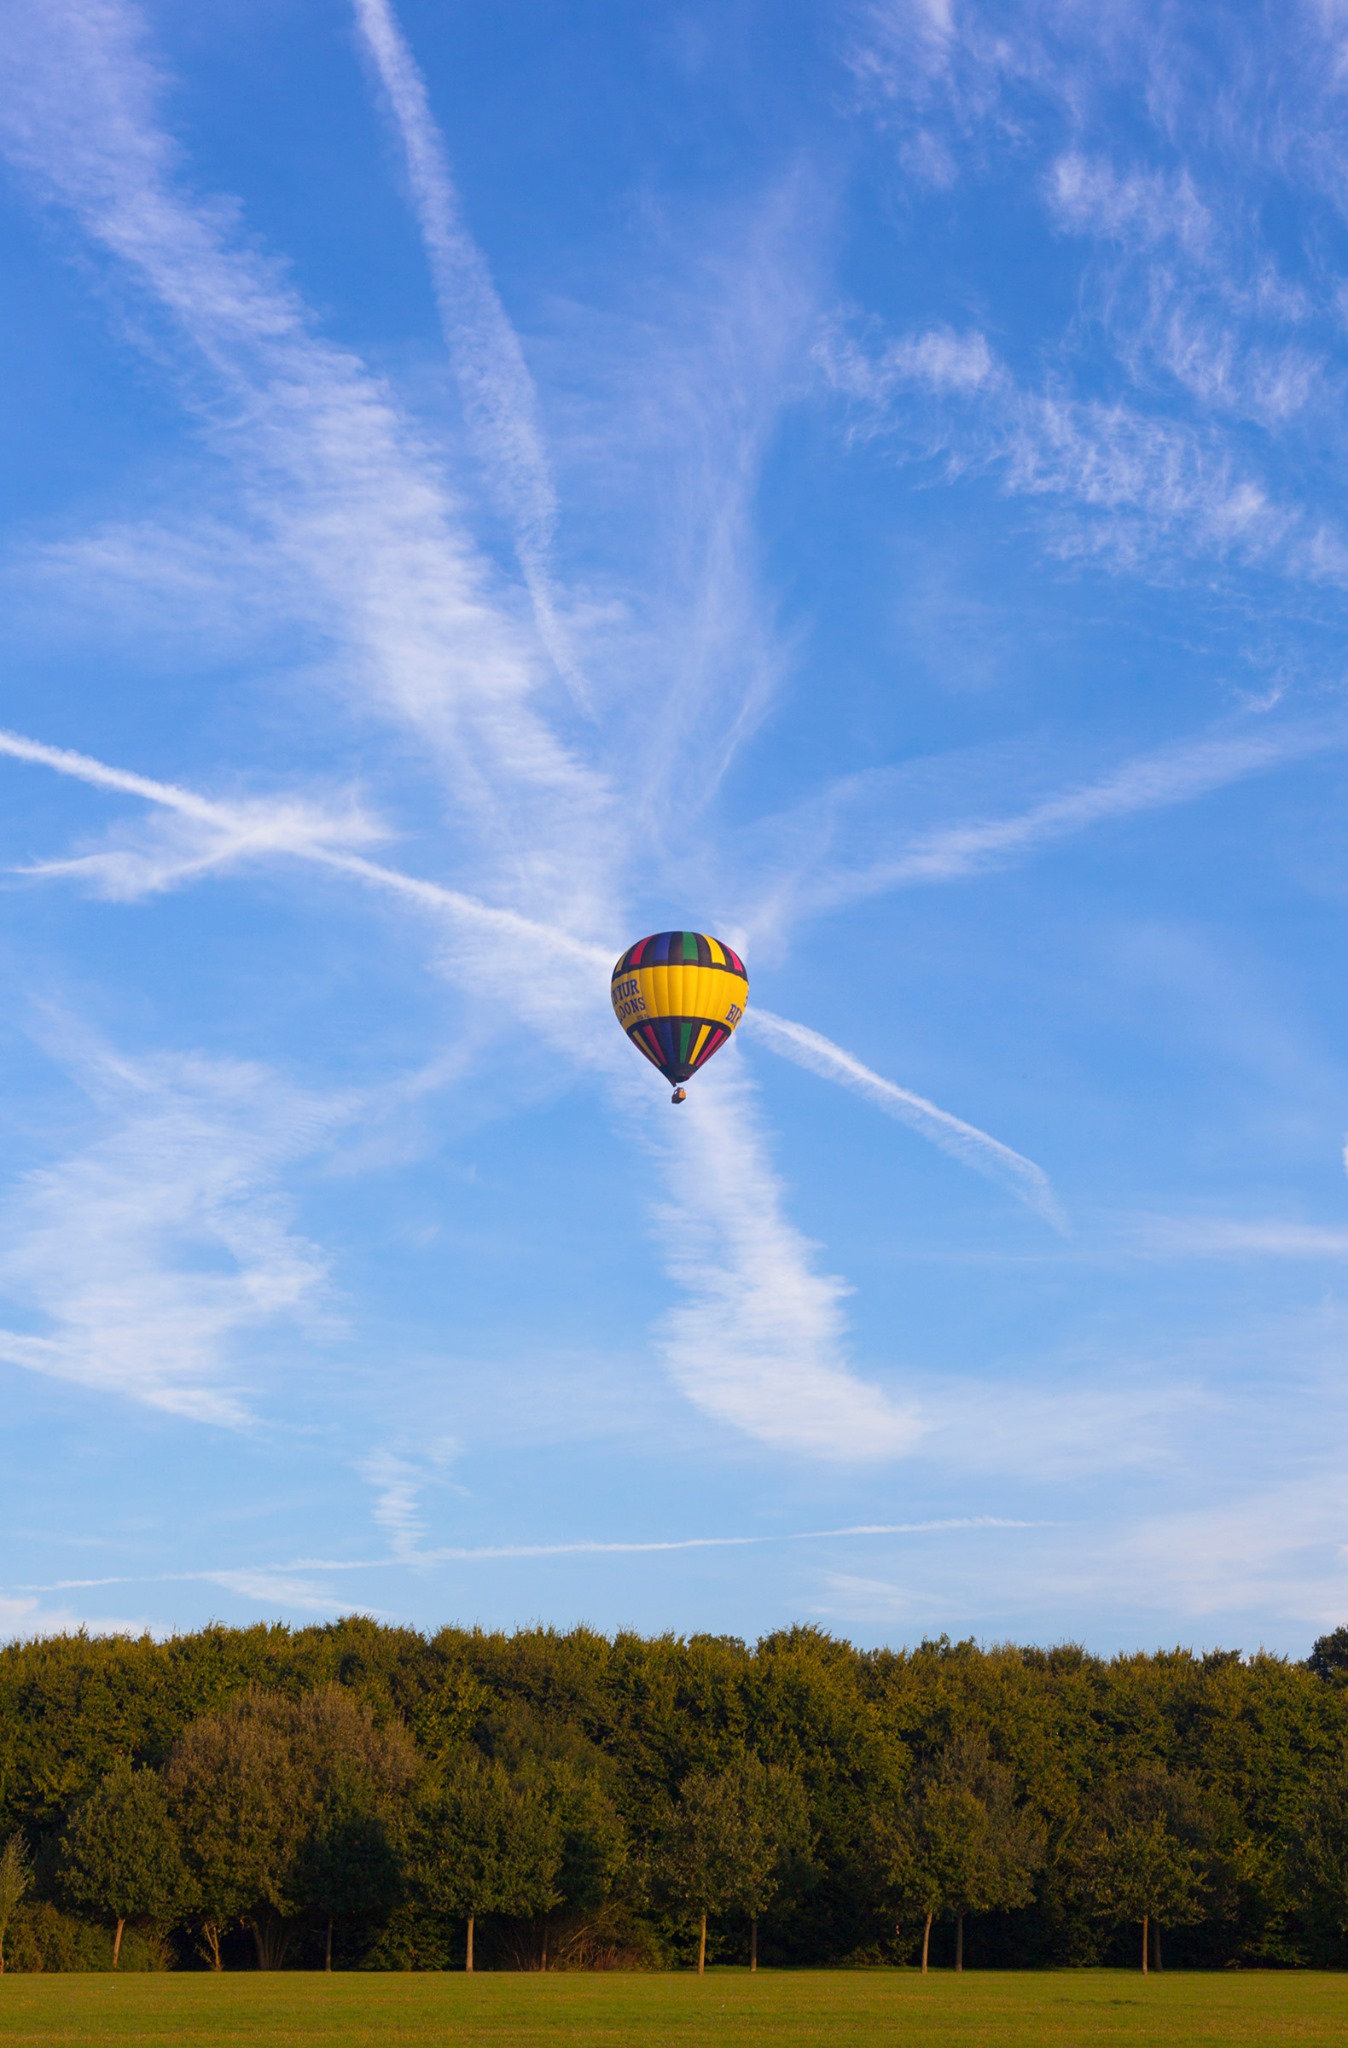 Condensation trails from aircraft flying from Luton airport criss cross the sky behind our Happy Birthday balloon as it takes off on a balloon flight from Fairlands Valley in Stevenage, Hertfordshire in 2019.